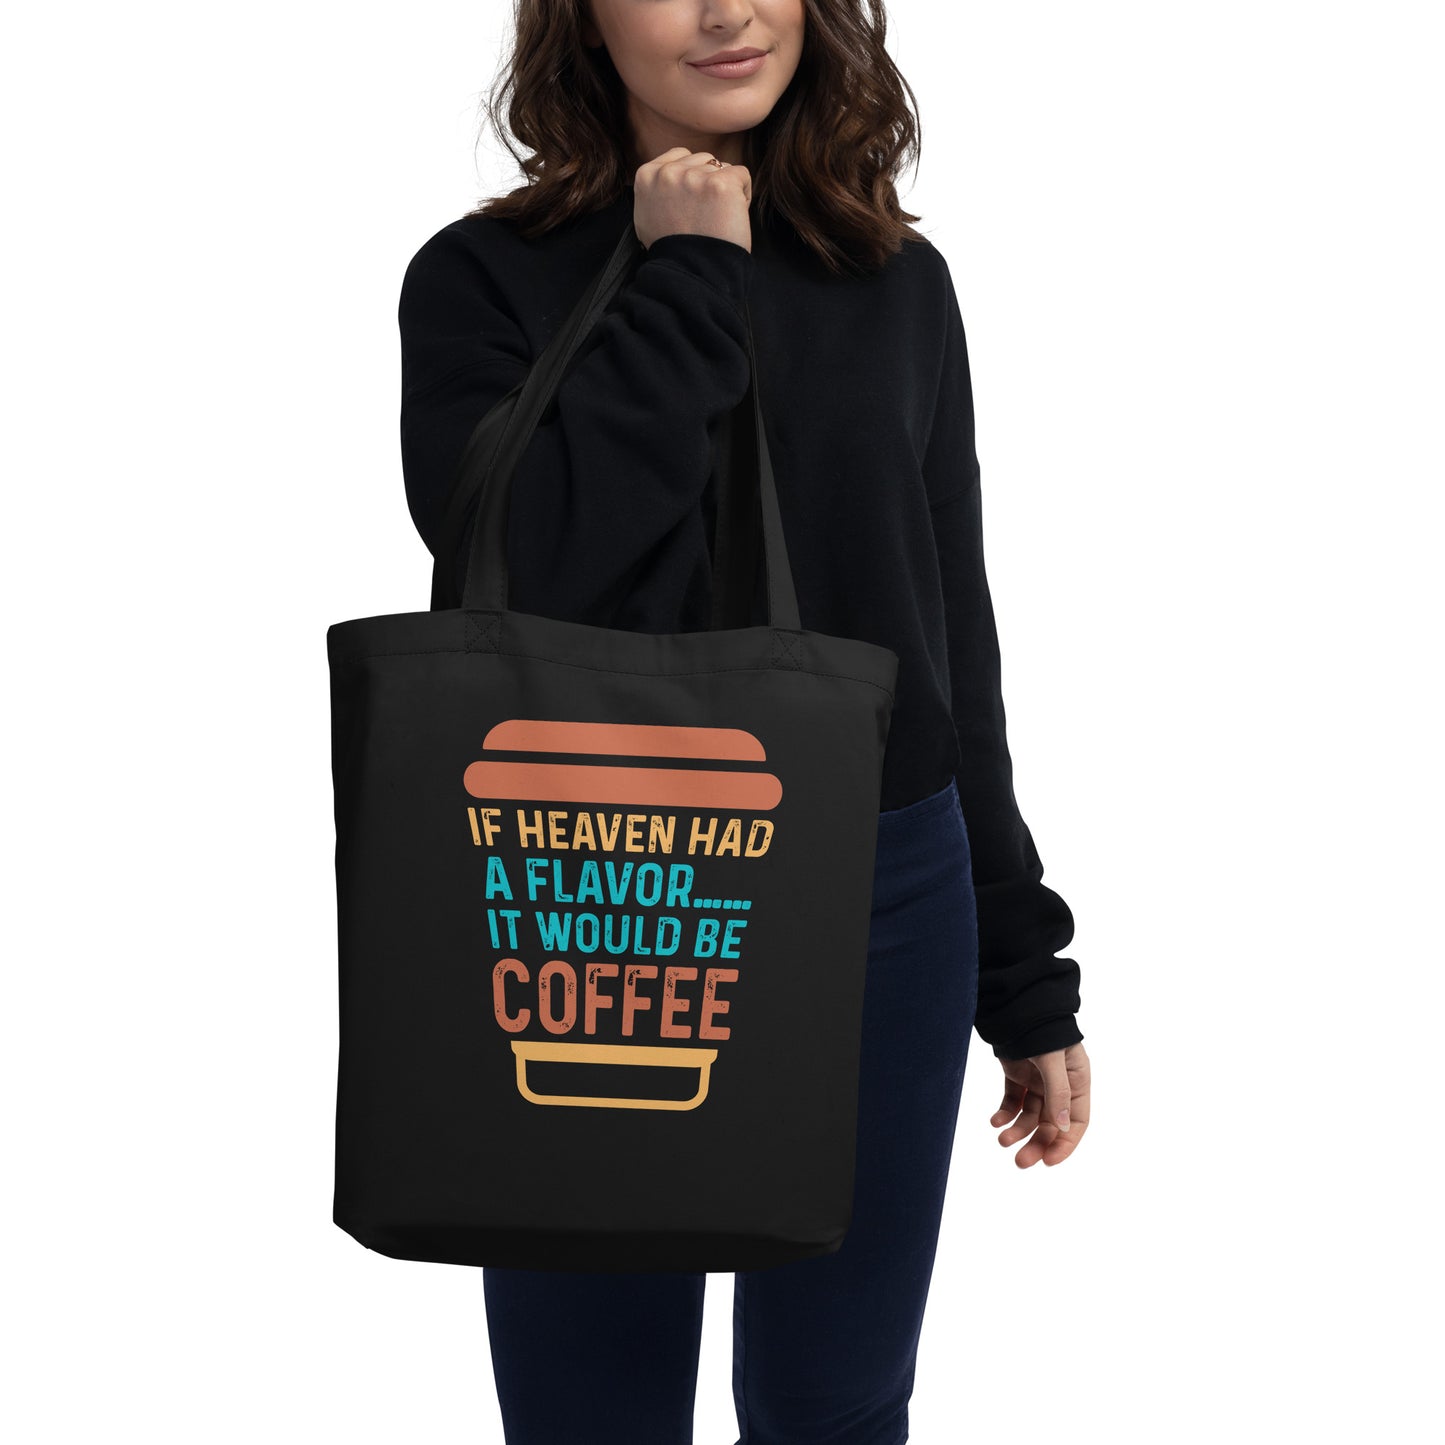 If Heaven Had a Flavor It Would Be Coffee Eco Tote Bag